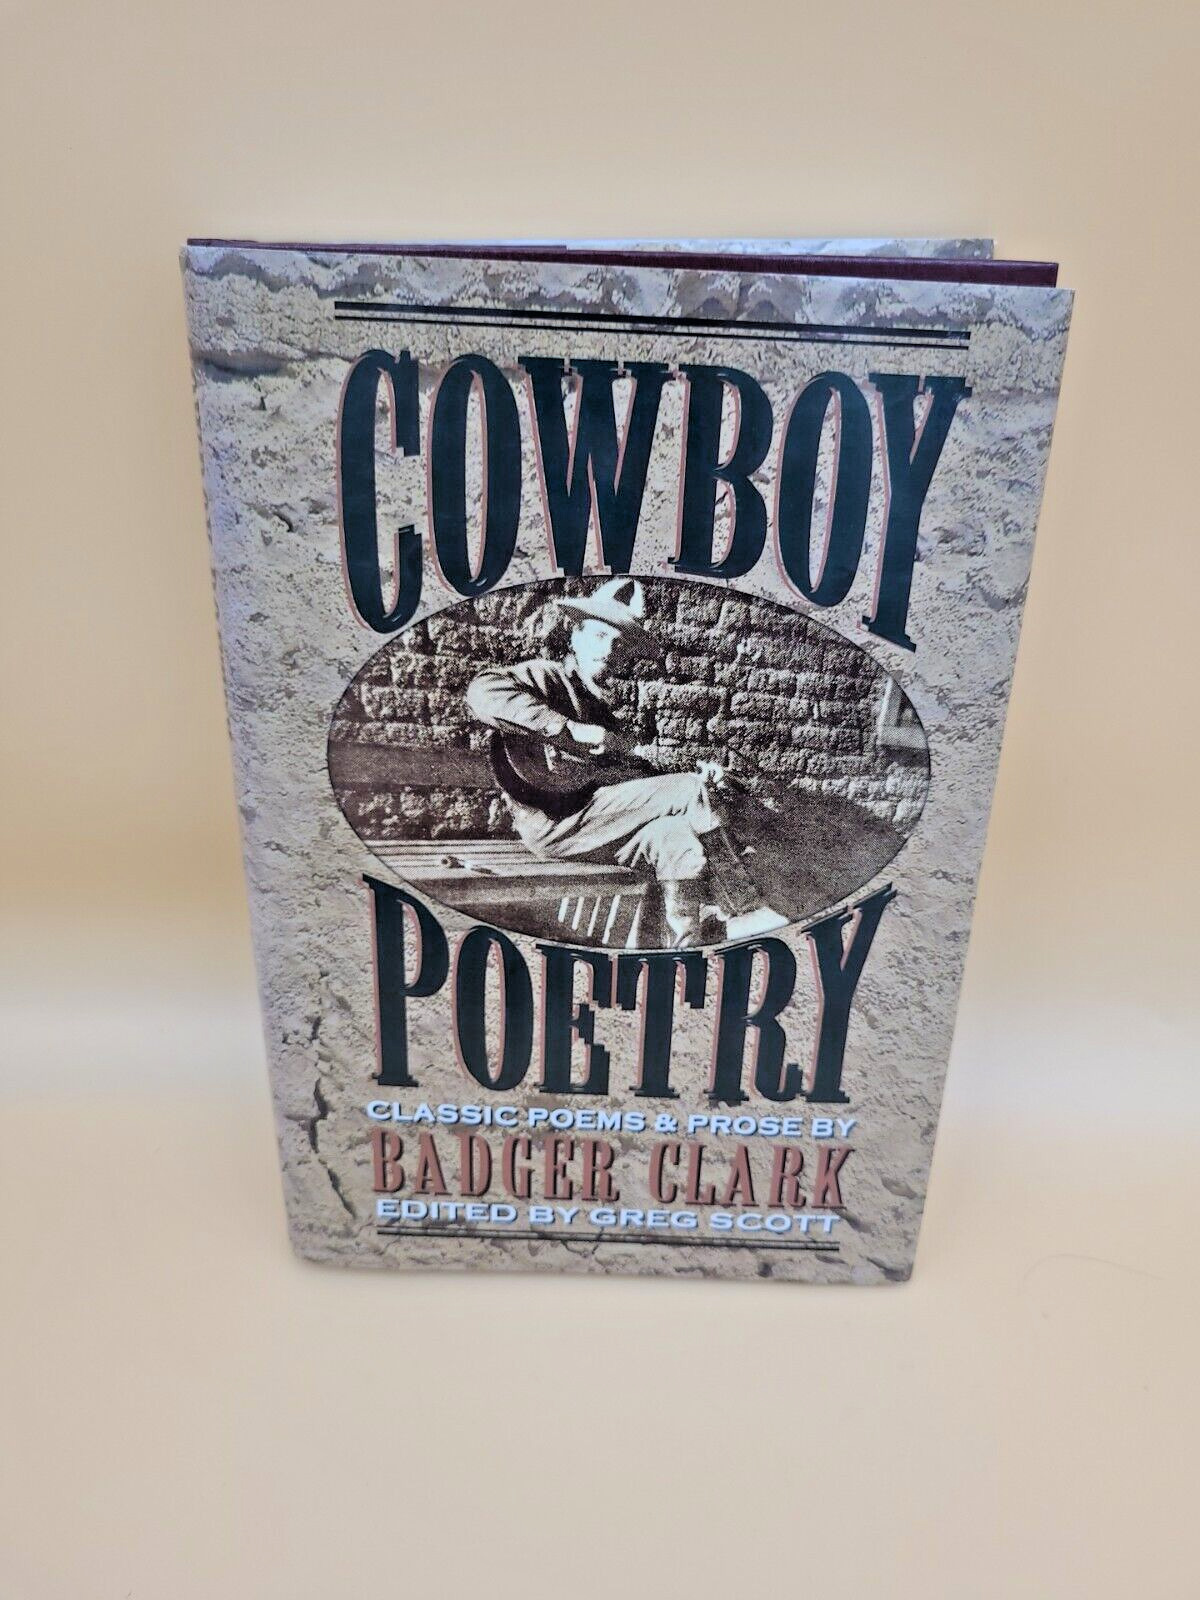 Cowboy Poetry Classic Poems & Prose by Badger Clark HC DJ VG